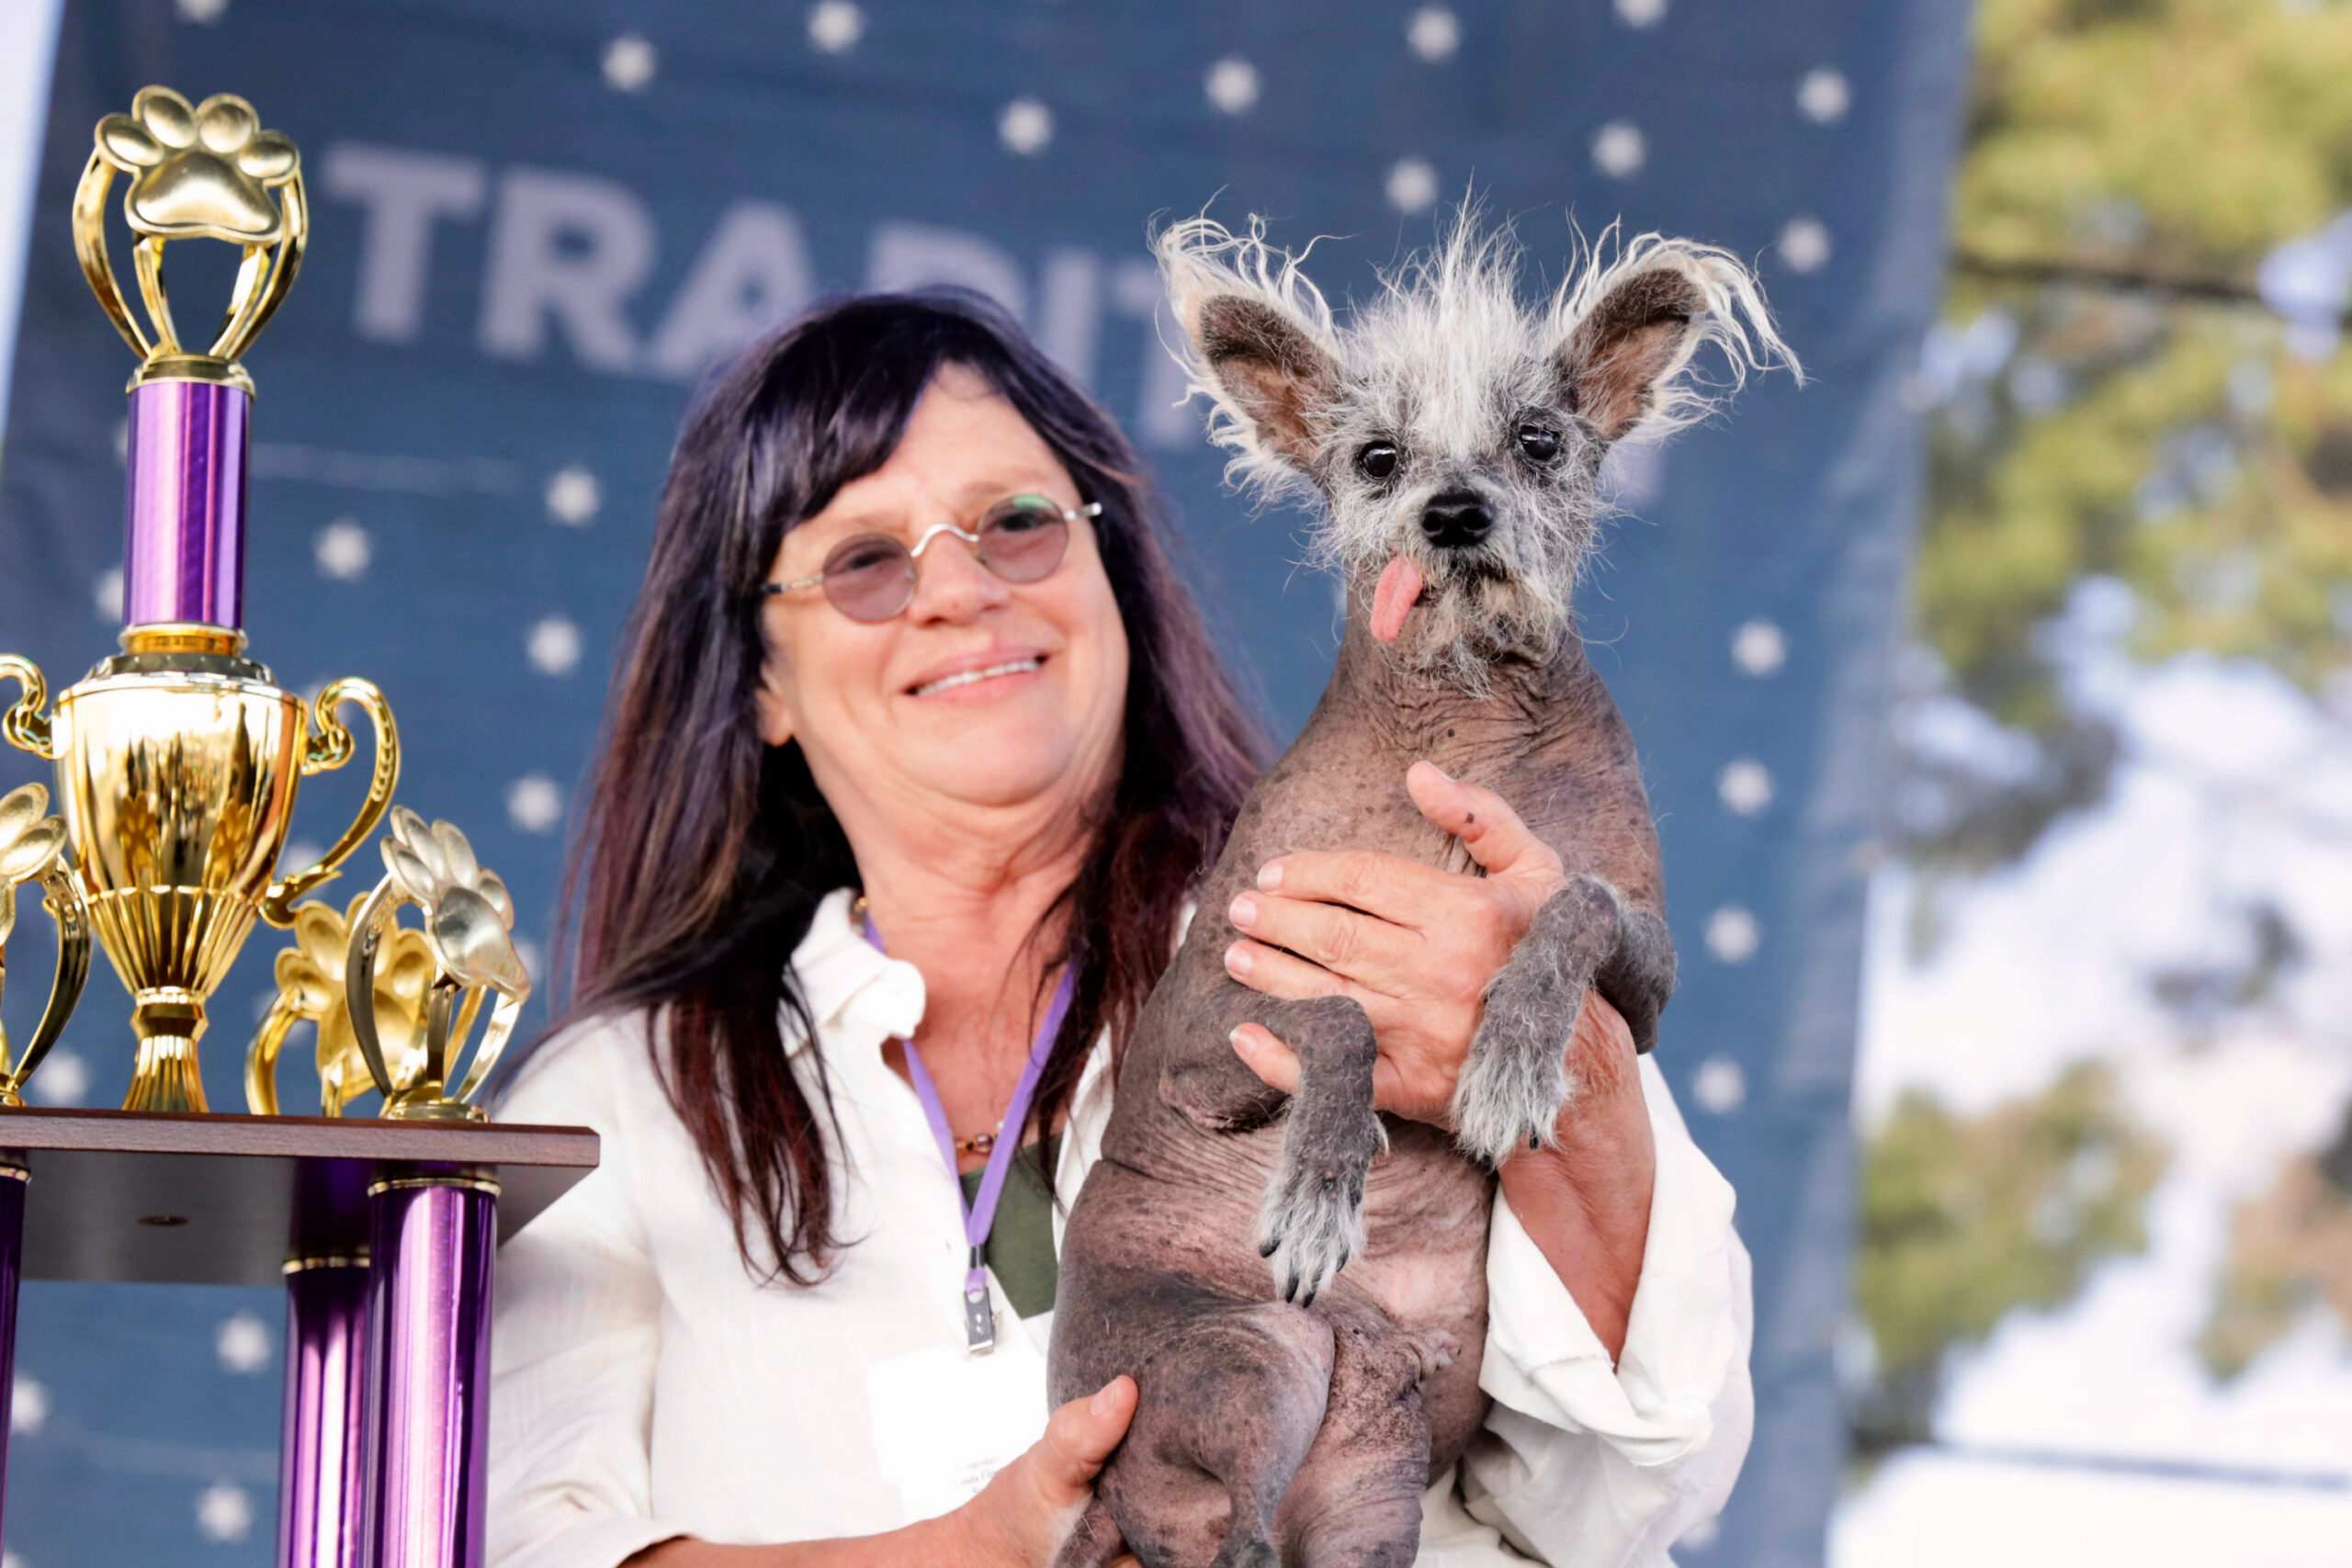 World’s Ugliest Dog Crowned at Bay Area County Fair